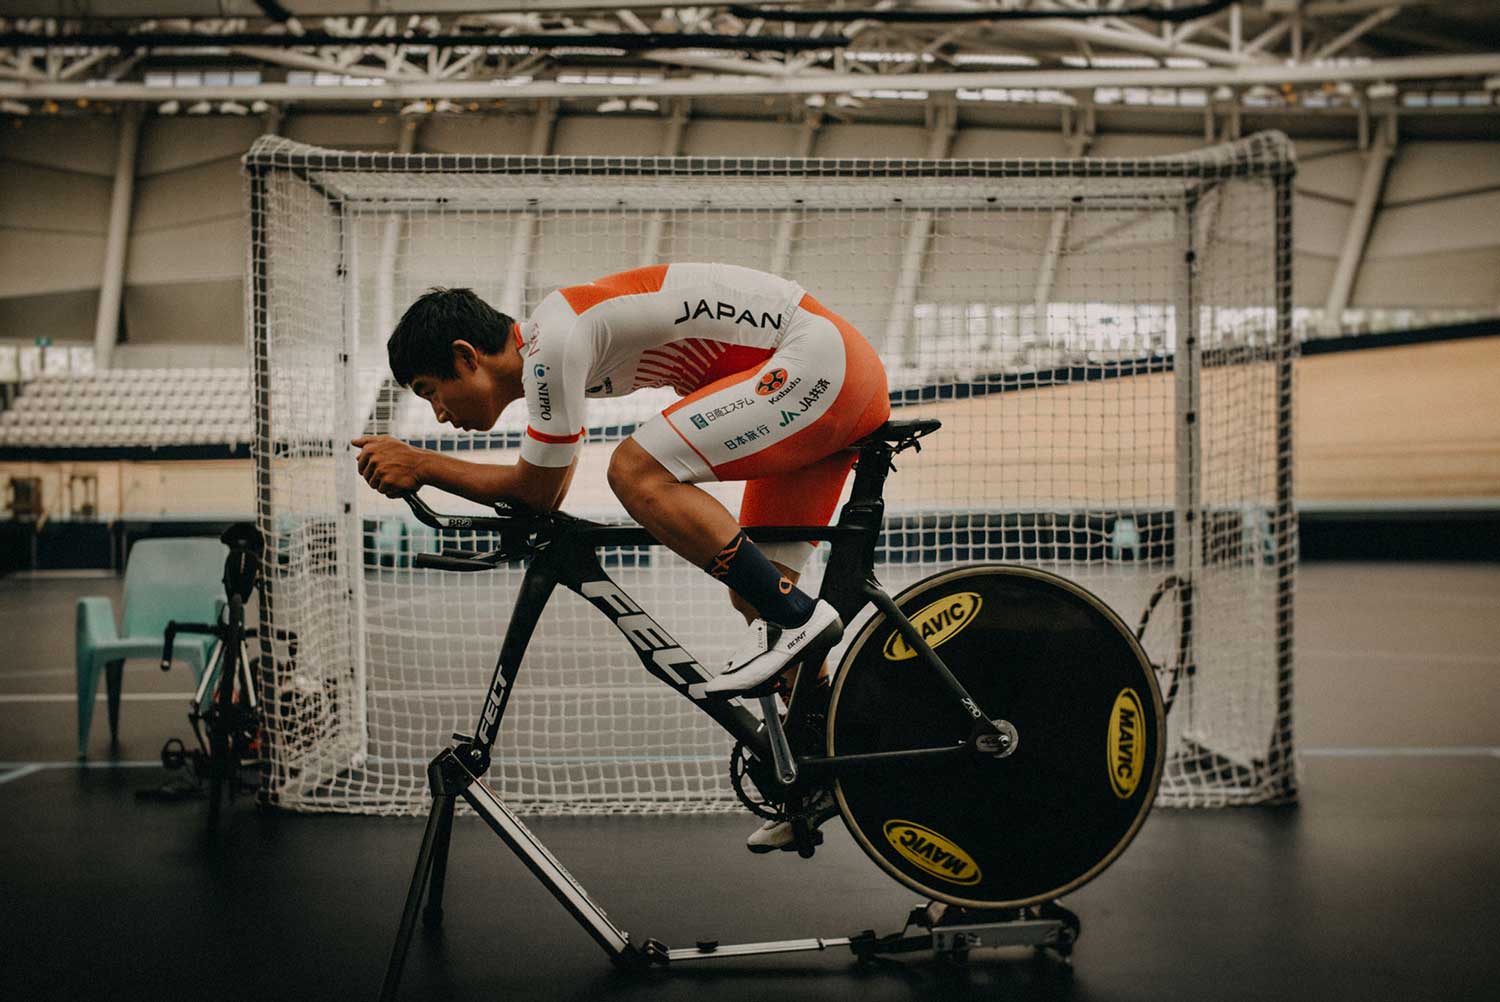 Japanese track cyclist trains on static bike with aerobars at velodrome during training session